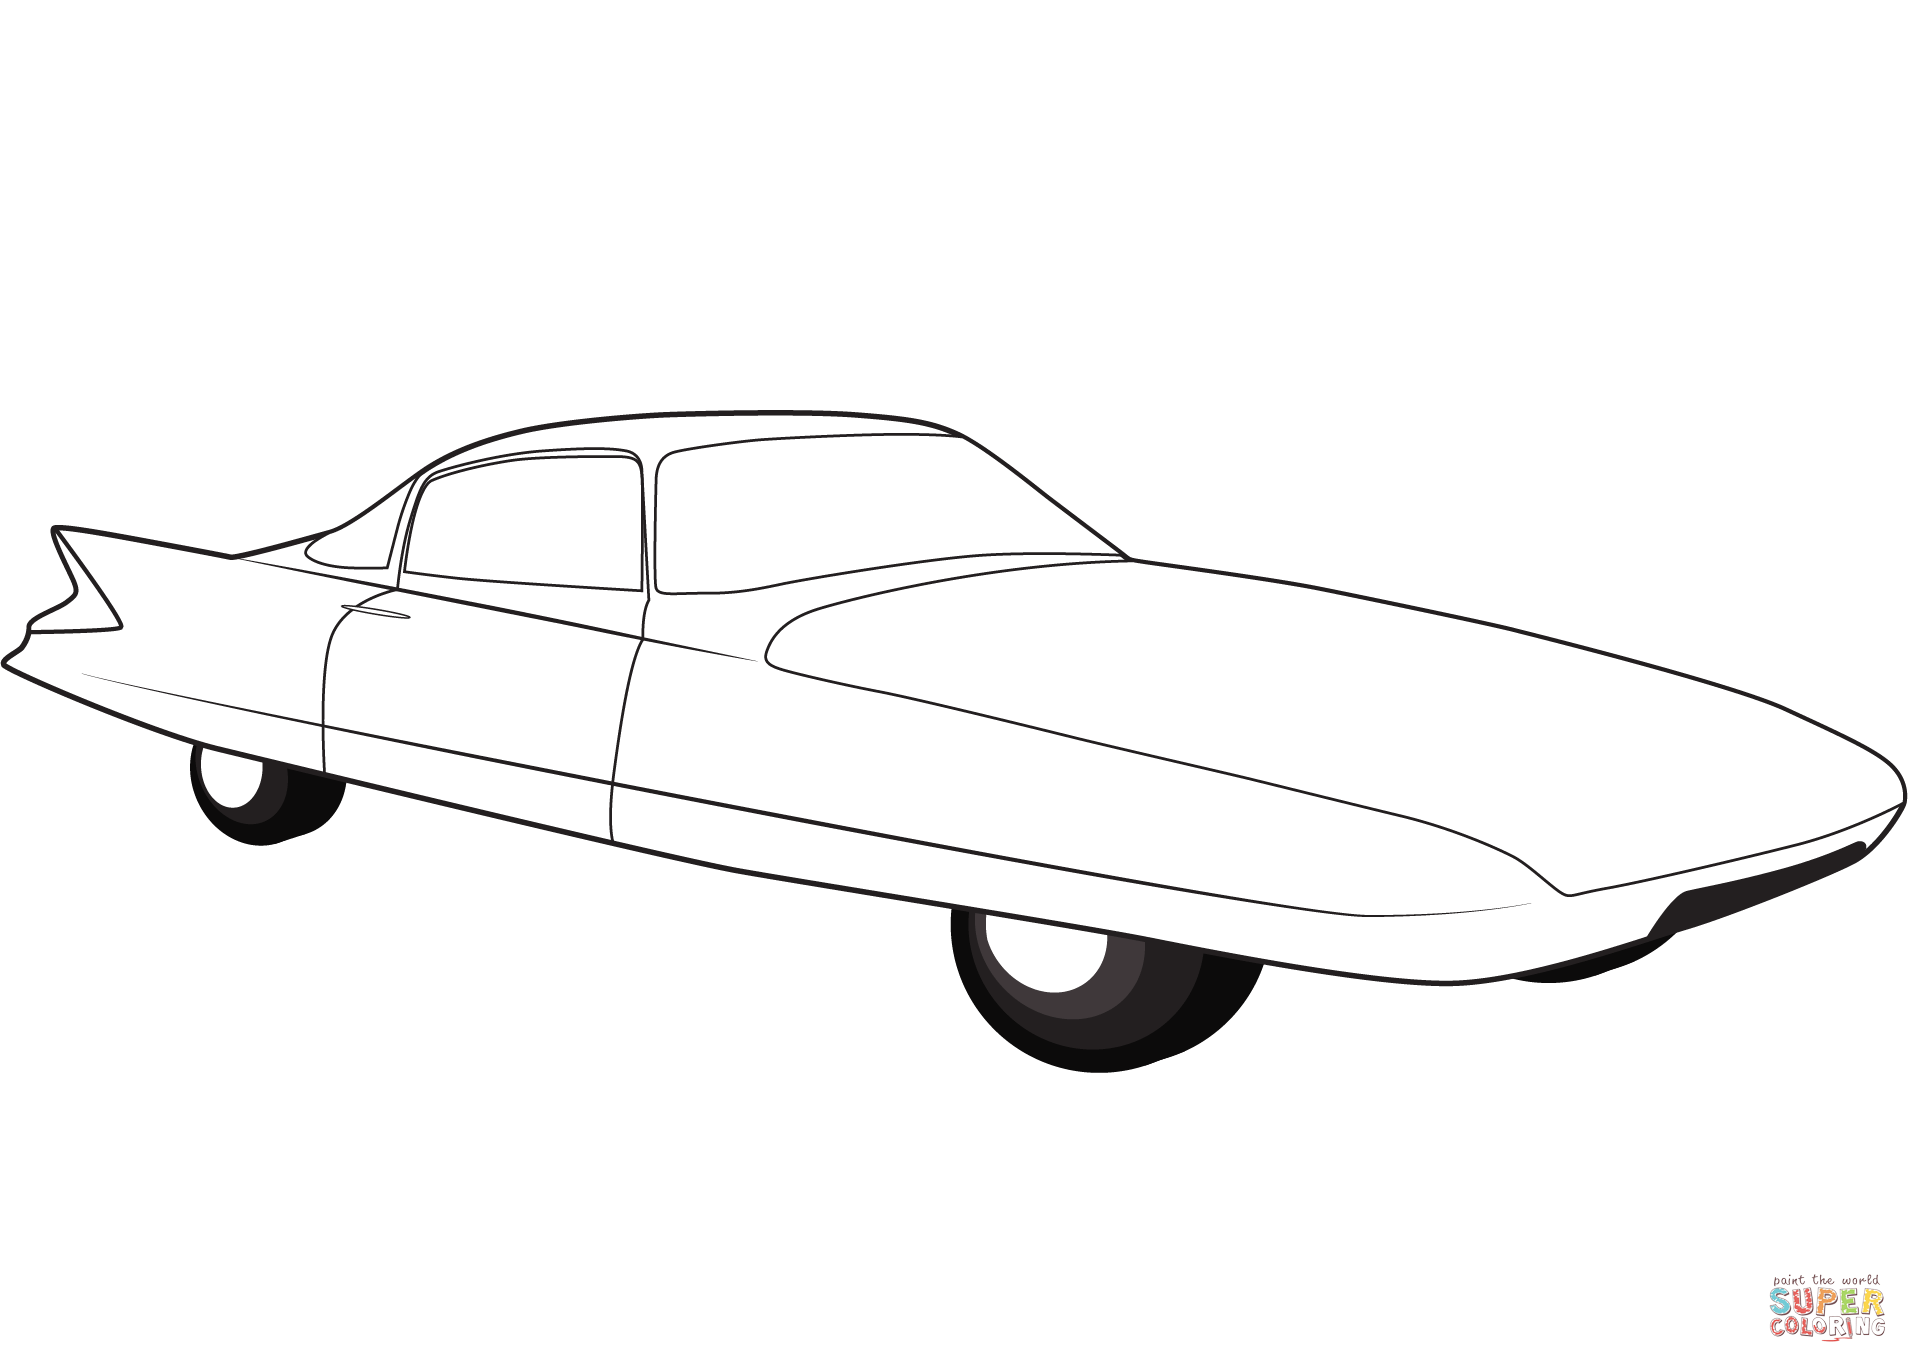 Chrysler ghia streamline x gilda coloring page free printable coloring pages